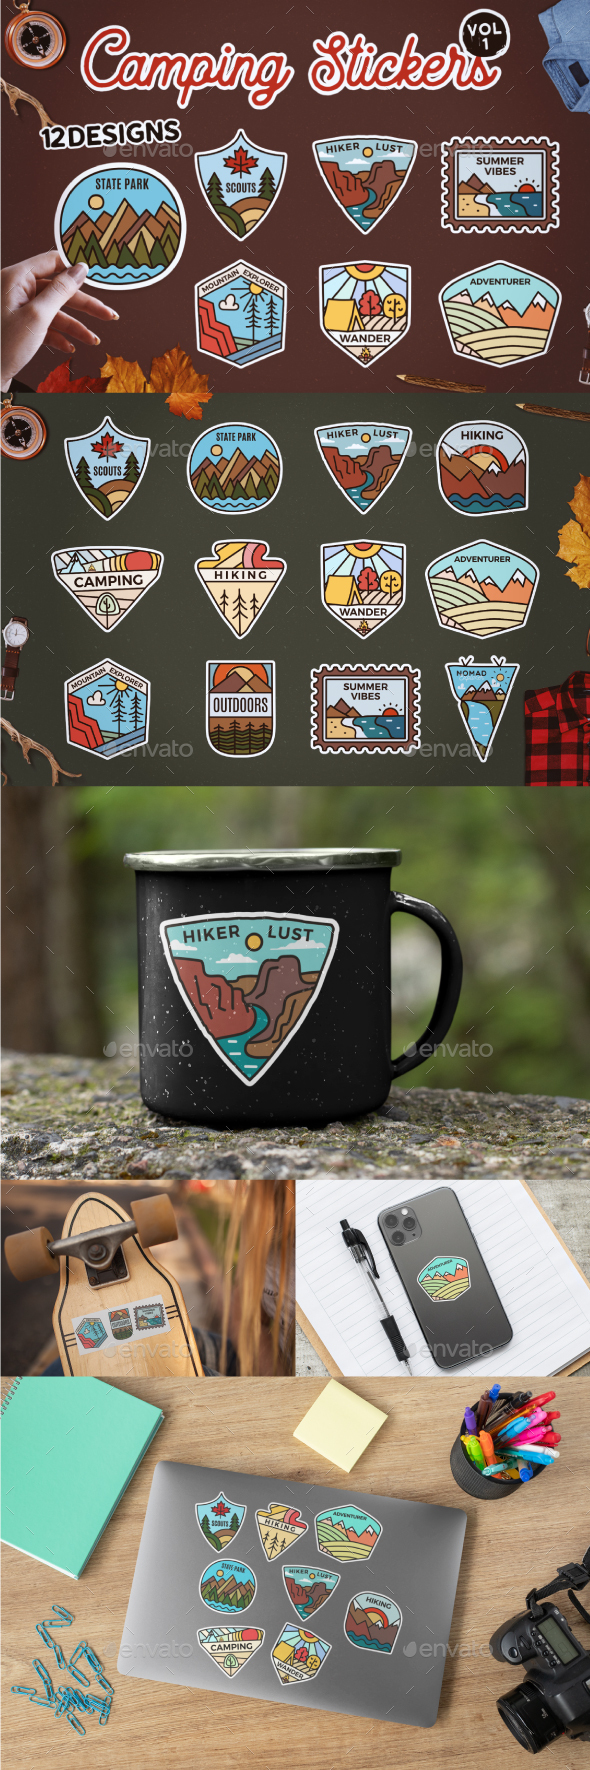 Camping Stickers Set Vol1